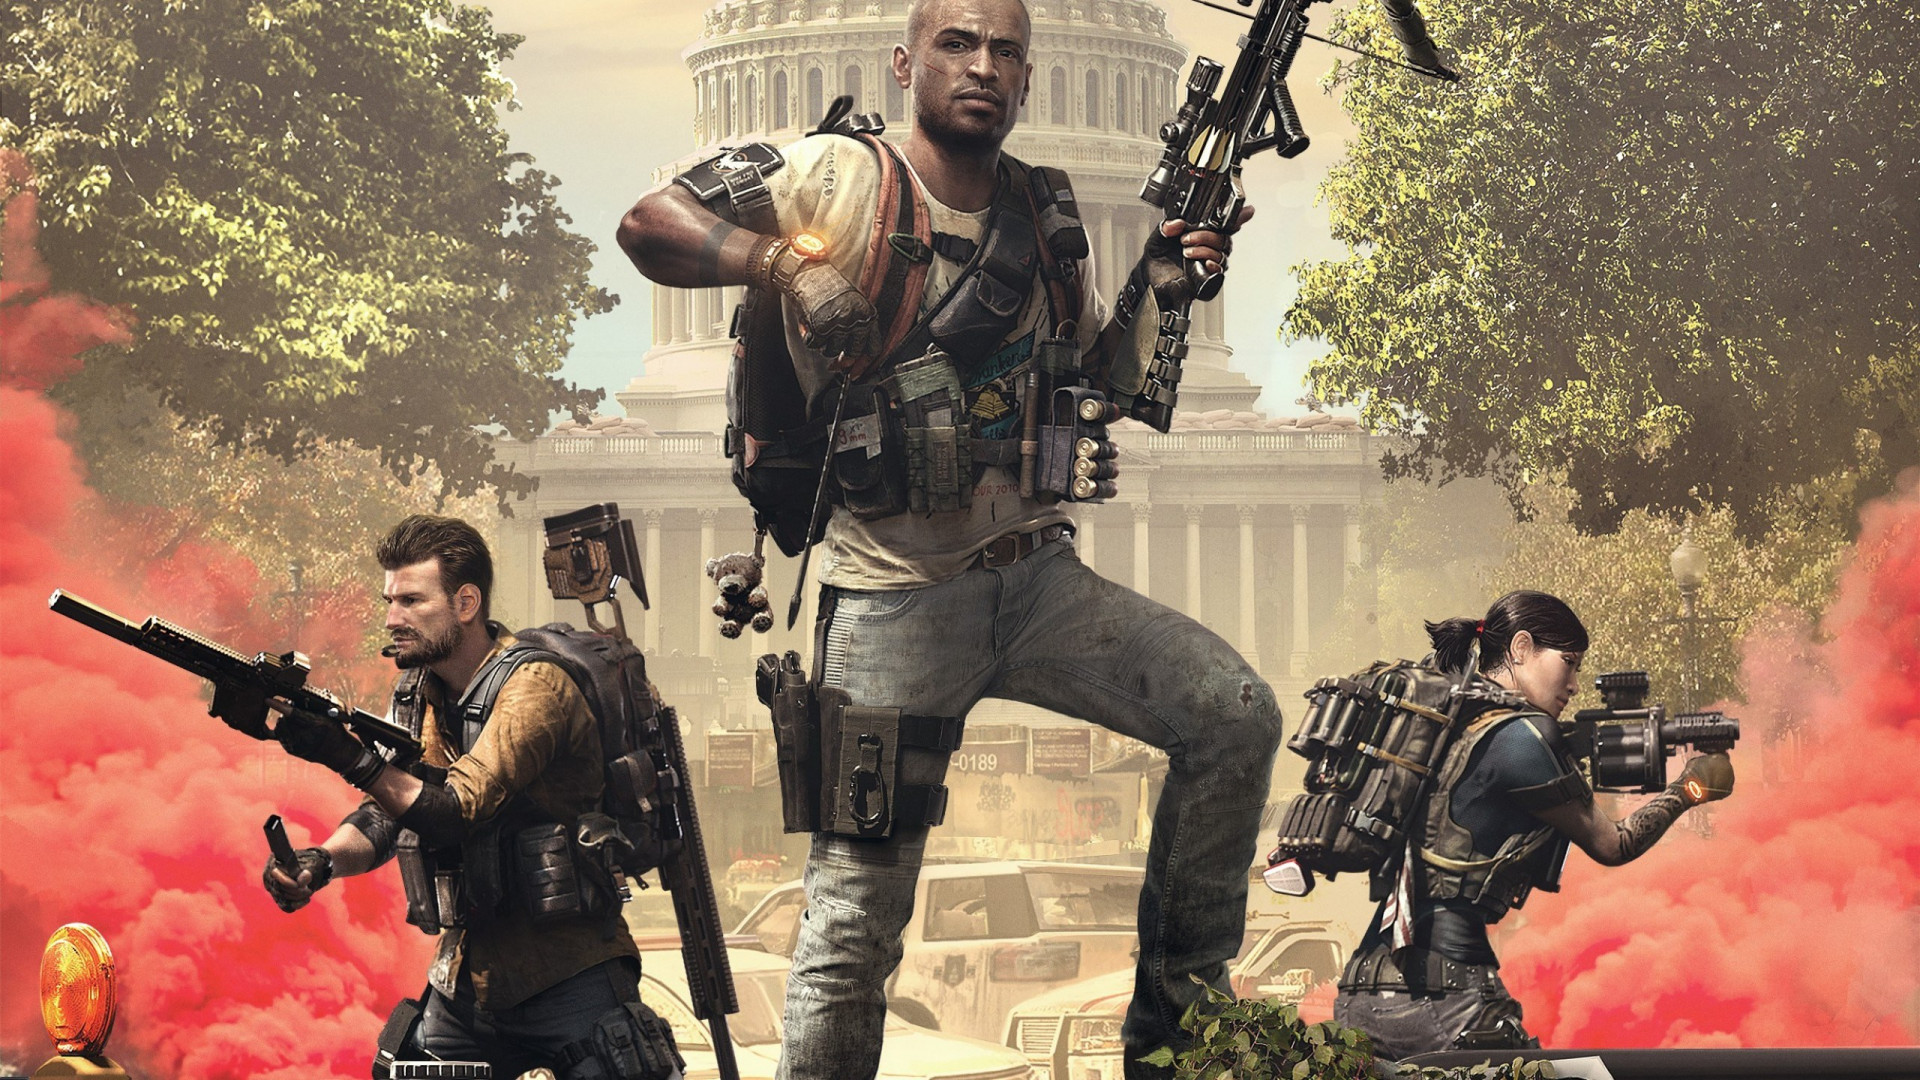 Tom Clancy's The Division 2 Episodes 2019 wallpaper 1920x1080